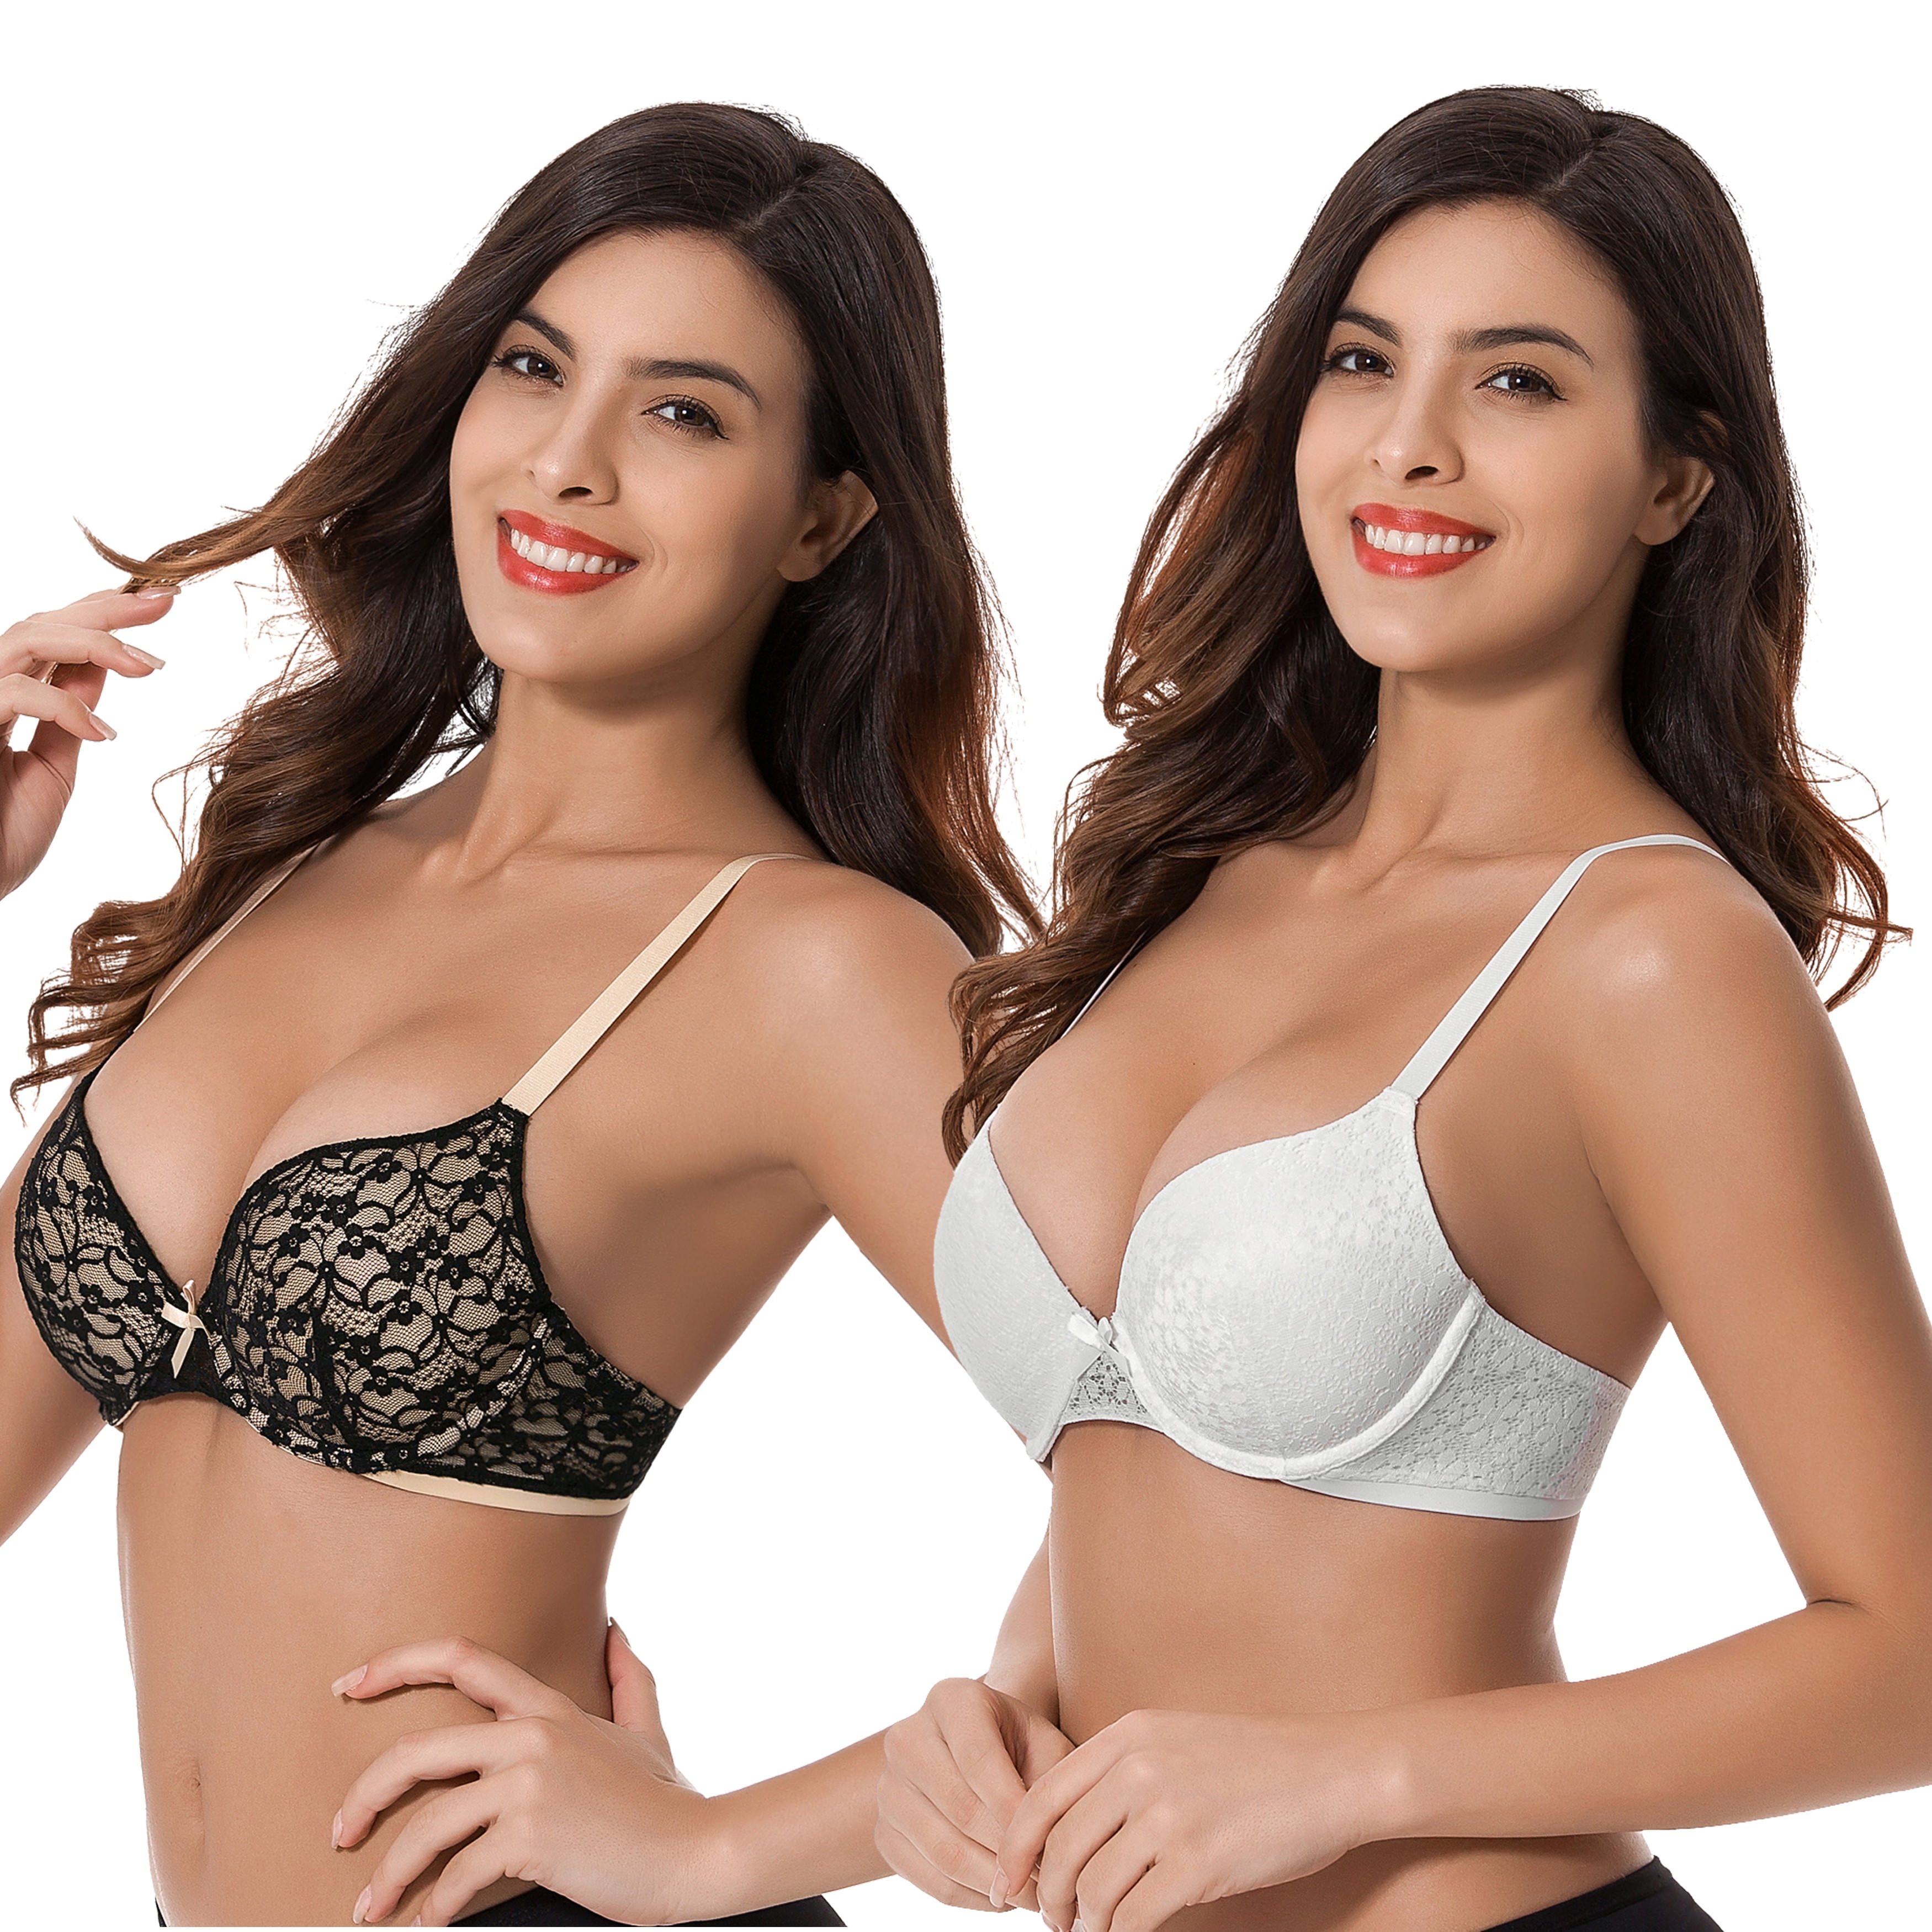 Curve Muse Women's Underwire Plus Size Push Up Add 1 and a Half Cup Lace  Bras-2PK-Cream/Brown,Brown/Rose Gold-40B